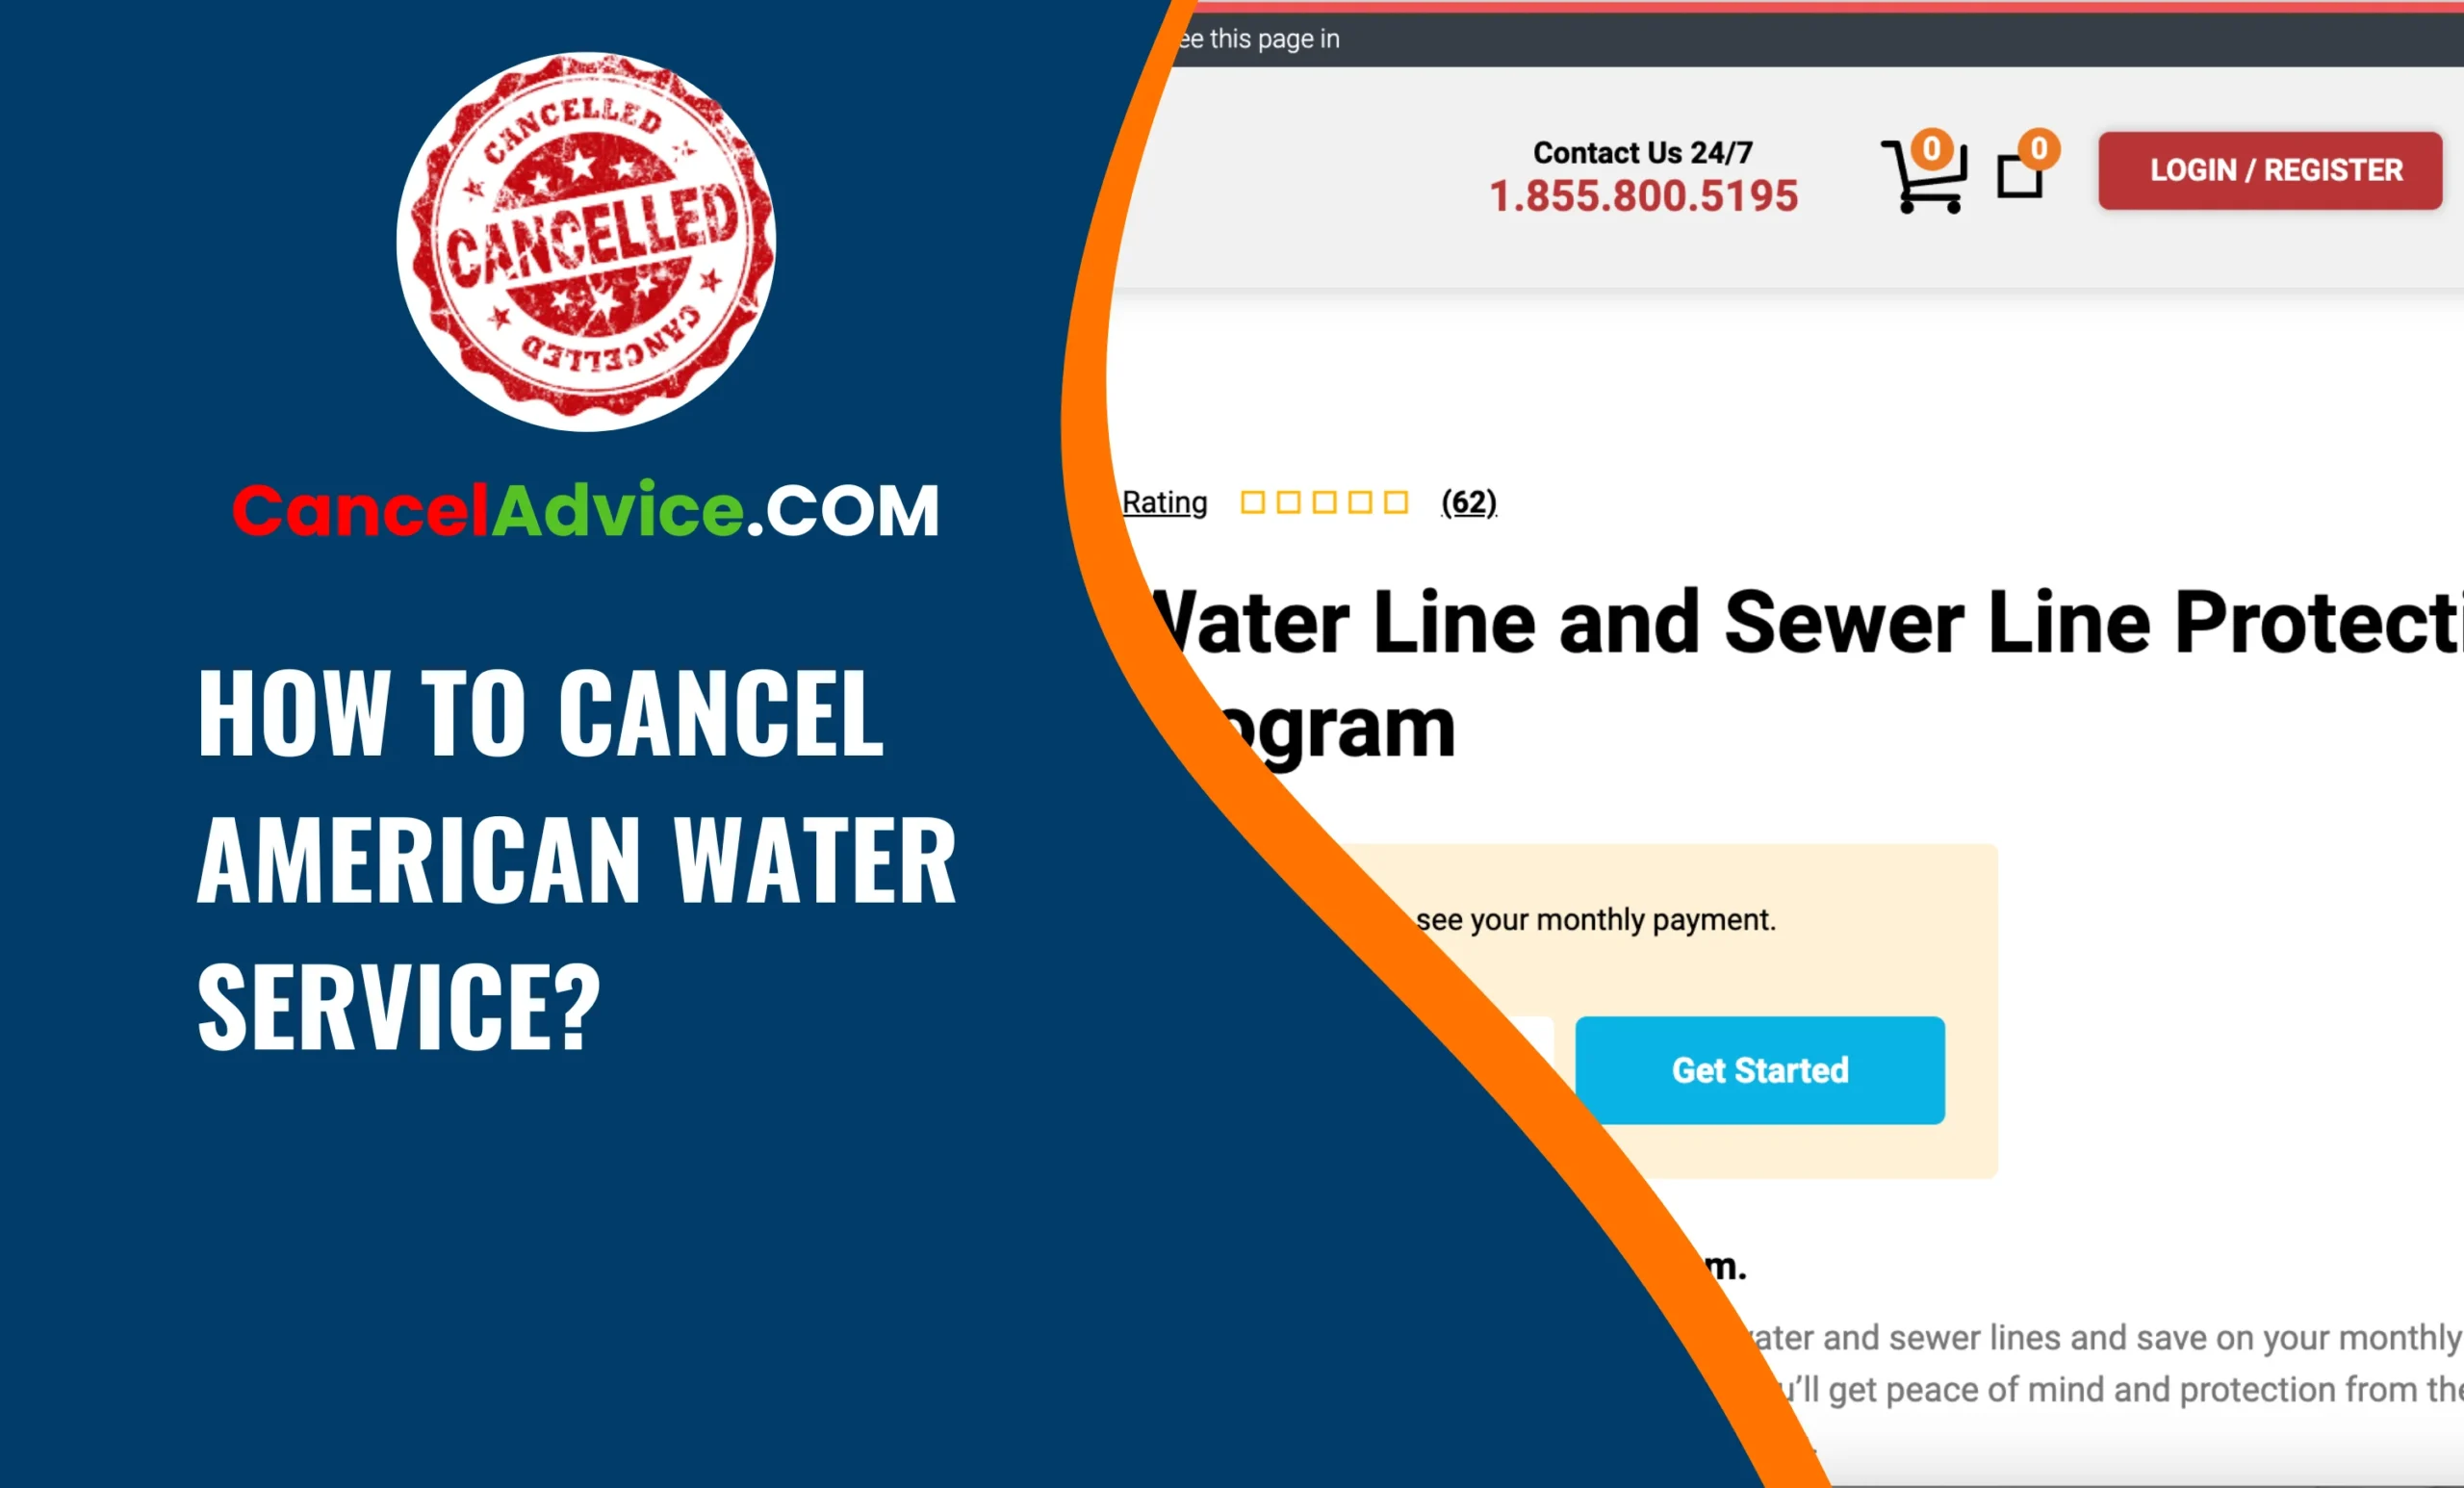 How to Cancel Your American Water Service